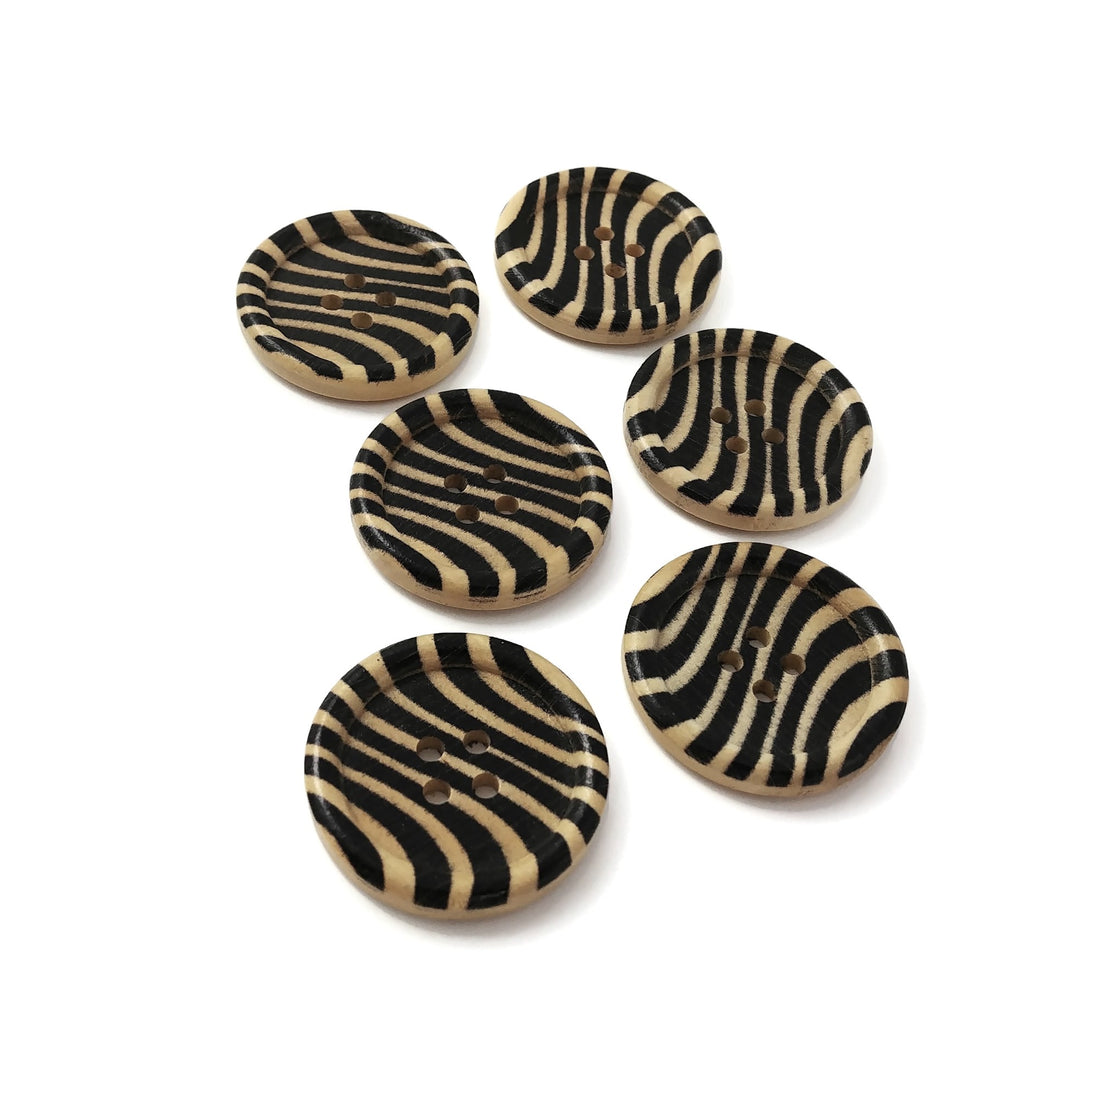 Zebra Pattern Wooden Sewing Buttons 30mm - Natural and Black wood button set of 6